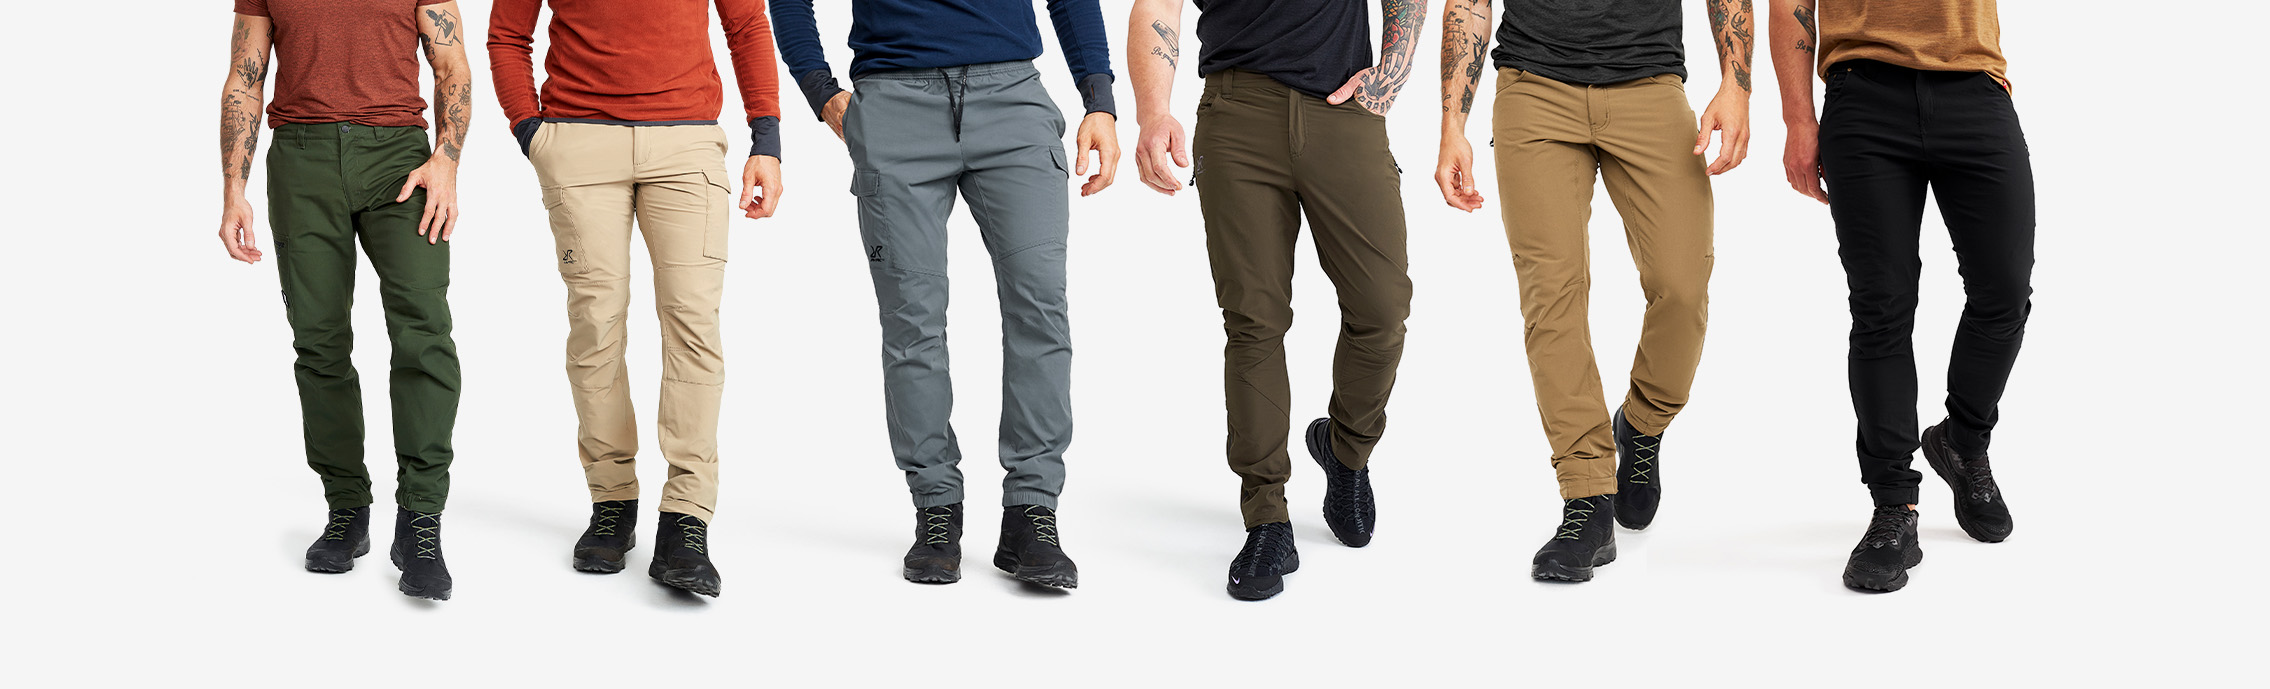 Best Guide To The 10 Different Types of Pants for Men | LBB